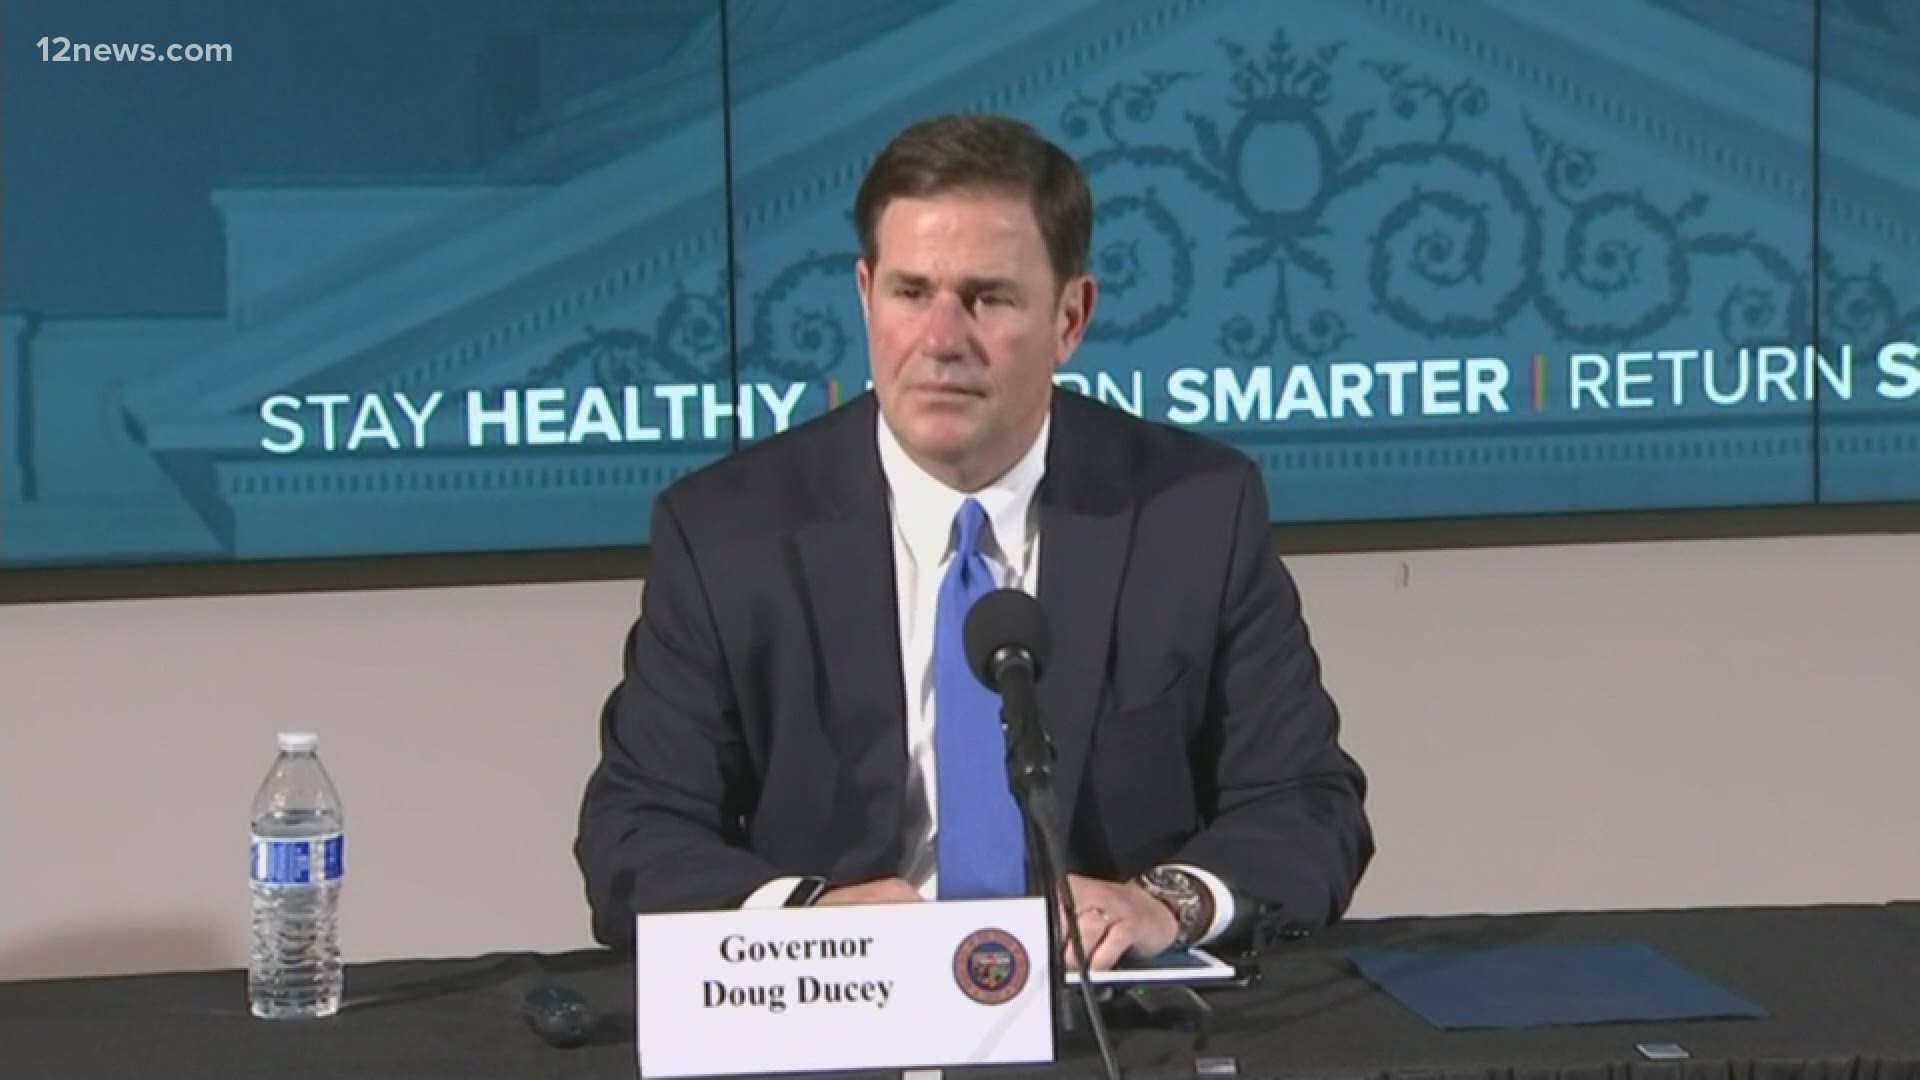 Gov. Ducey likes to say his decisions are data-driven. But he appeared to ignore the data on a huge screen right behind him at a news conference on Thursday.